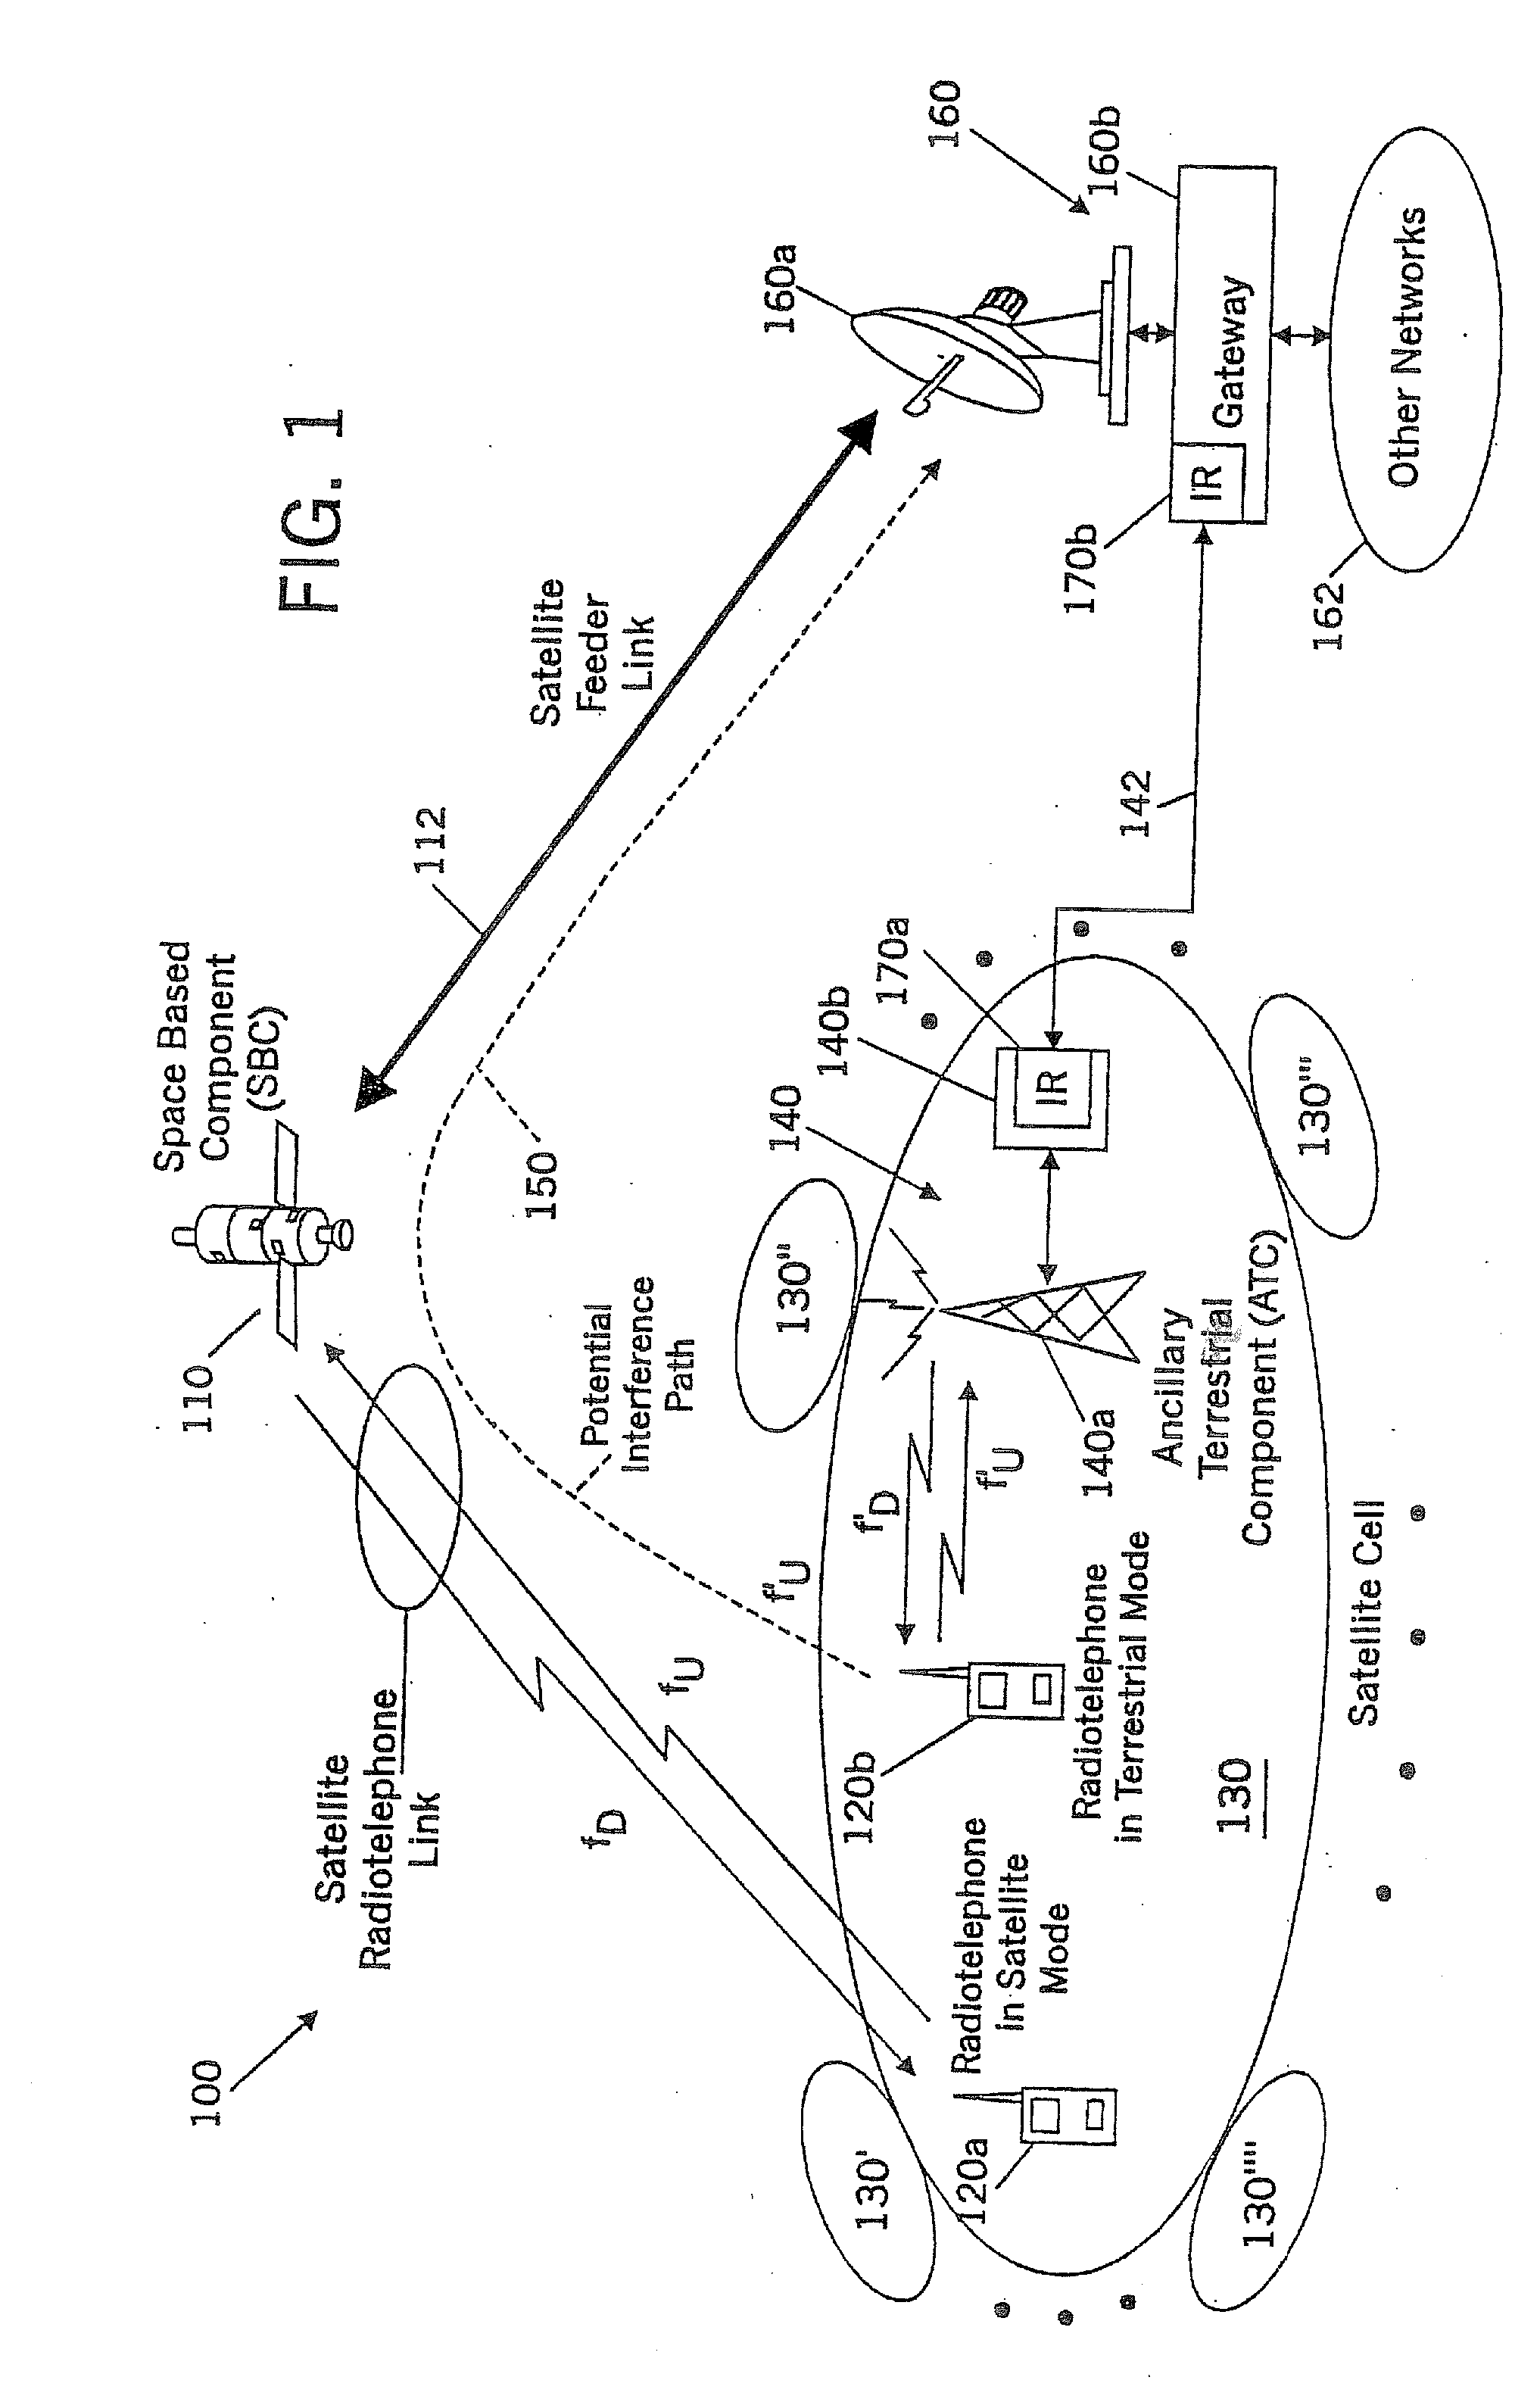 Systems and methods for terrestrial reuse of cellular satellite frequency spectrum using different channel separation technologies in forward and reverse links